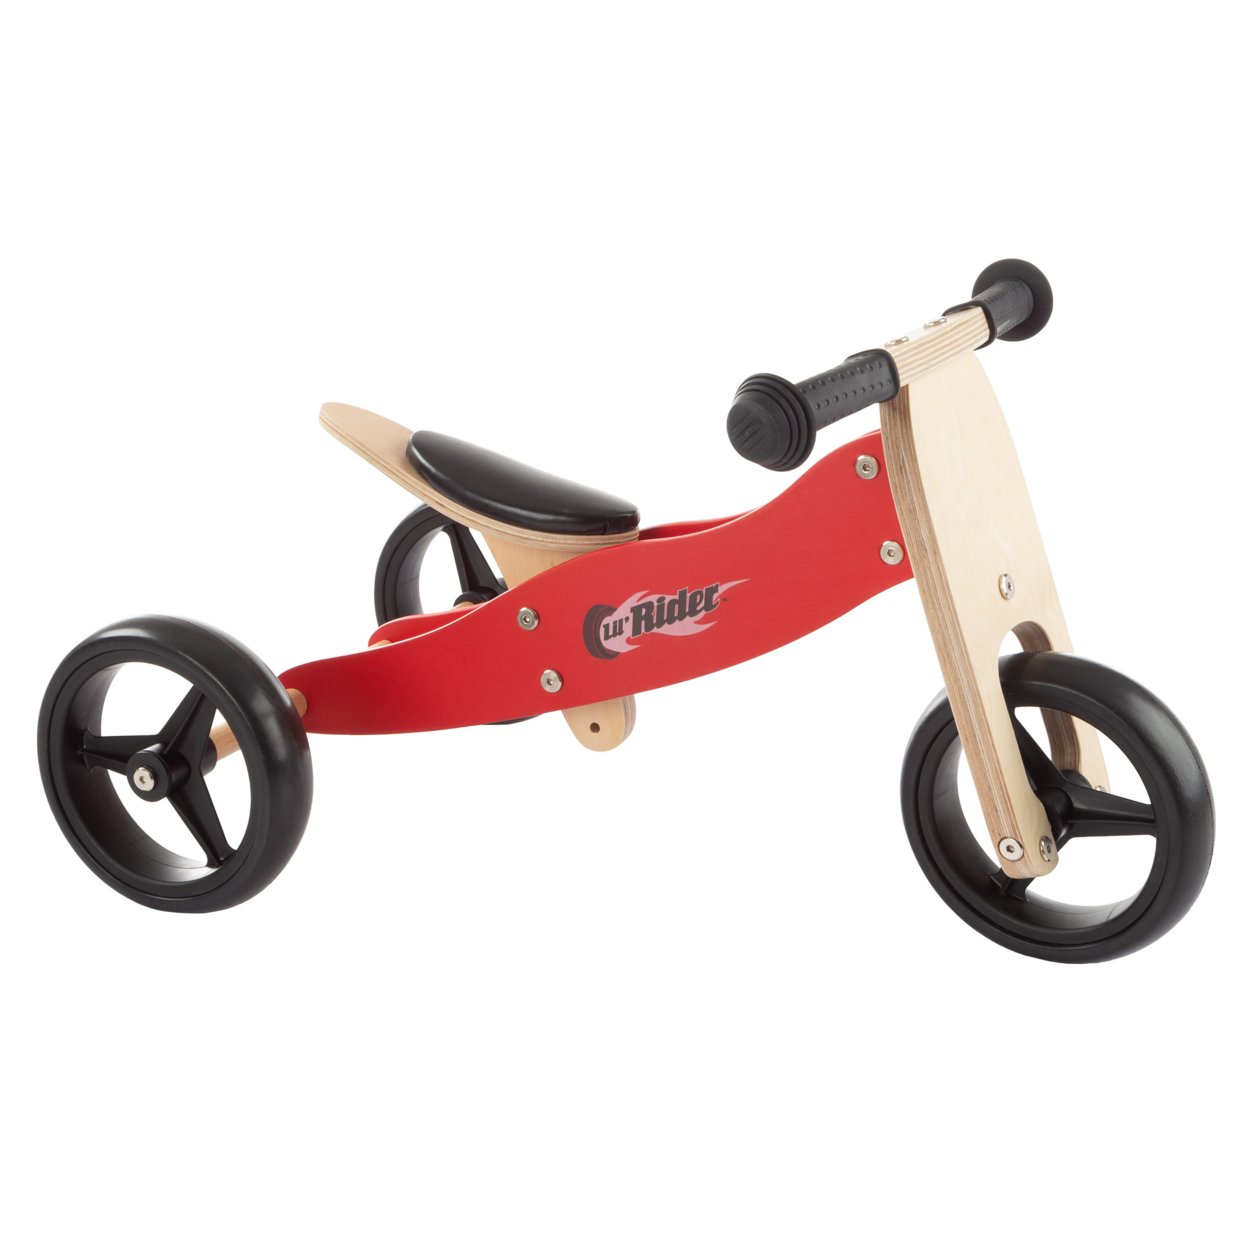 2-in-1 Wooden Balance Bike & Push Tricycle- Ride-On Toy With Easy Grip Handles, No Pedals, Rubber Wheels For Boys And Girls